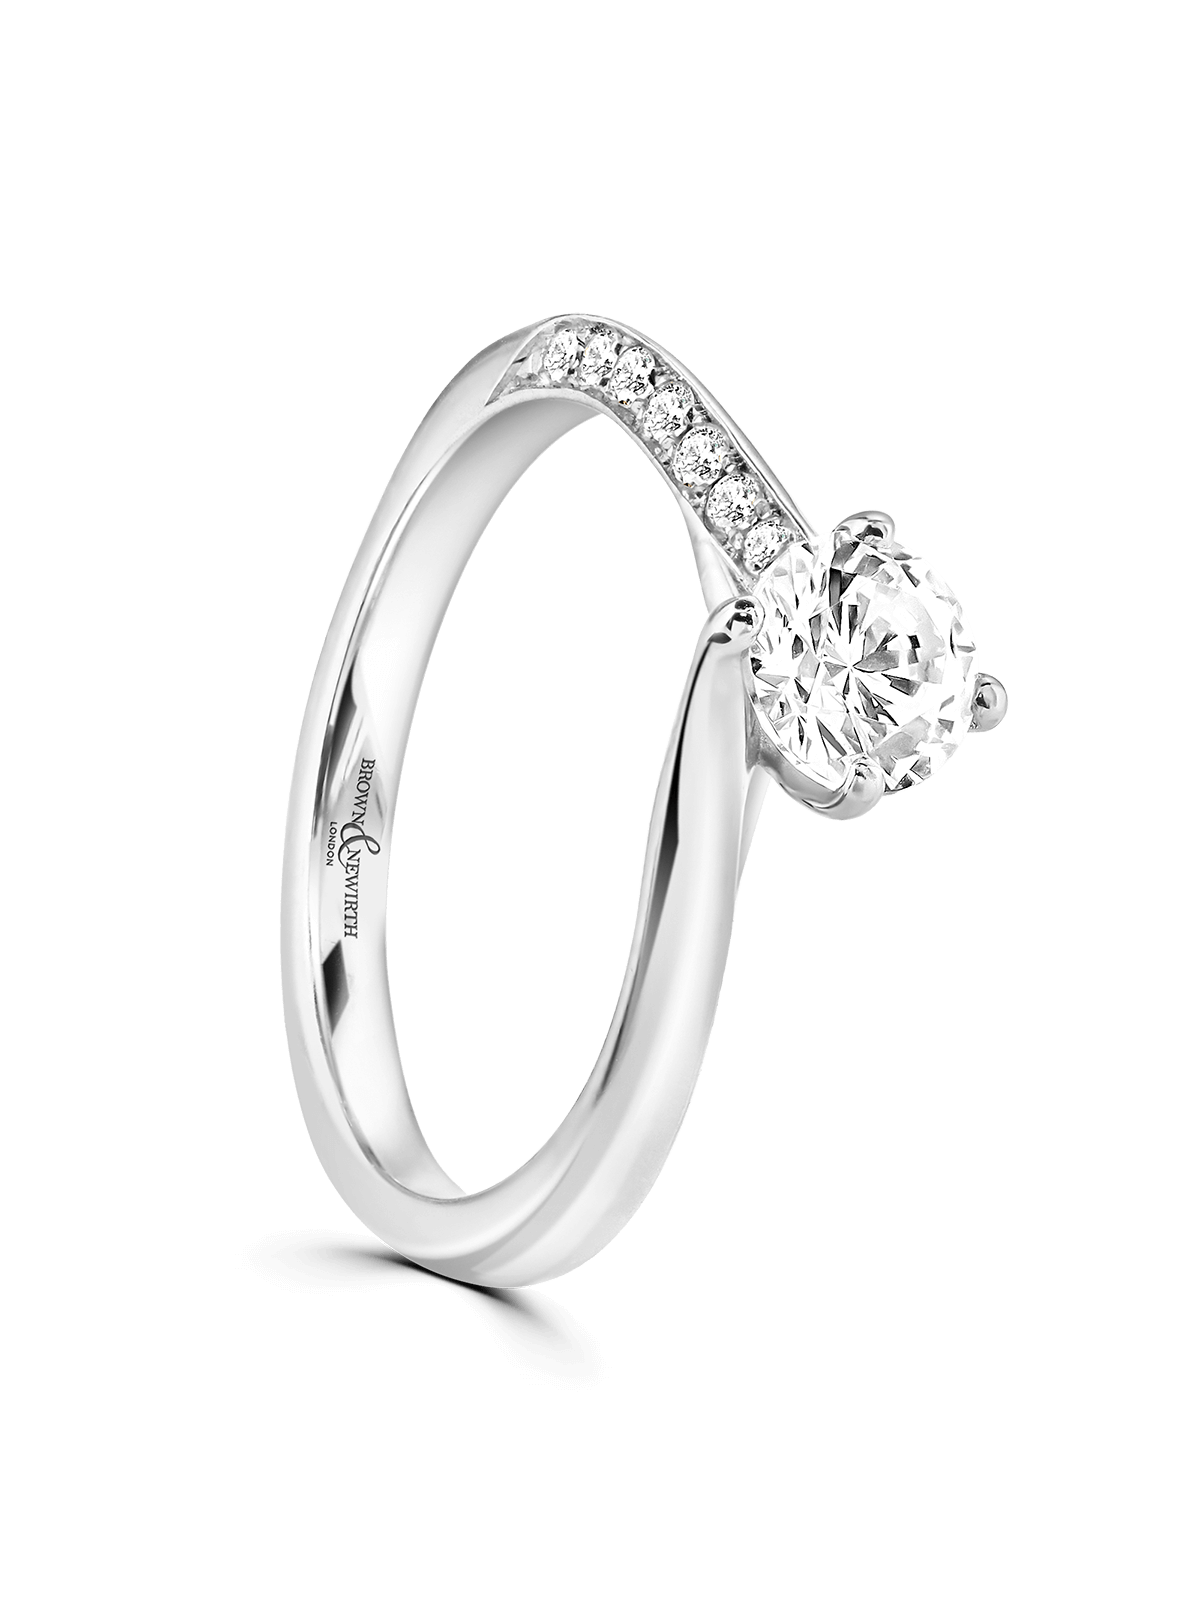 Brown & Newirth Alice 0.70ct Brilliant Cut Certificated Diamond Solitaire Engagement Ring in Platinum with Diamond Set Shoulders